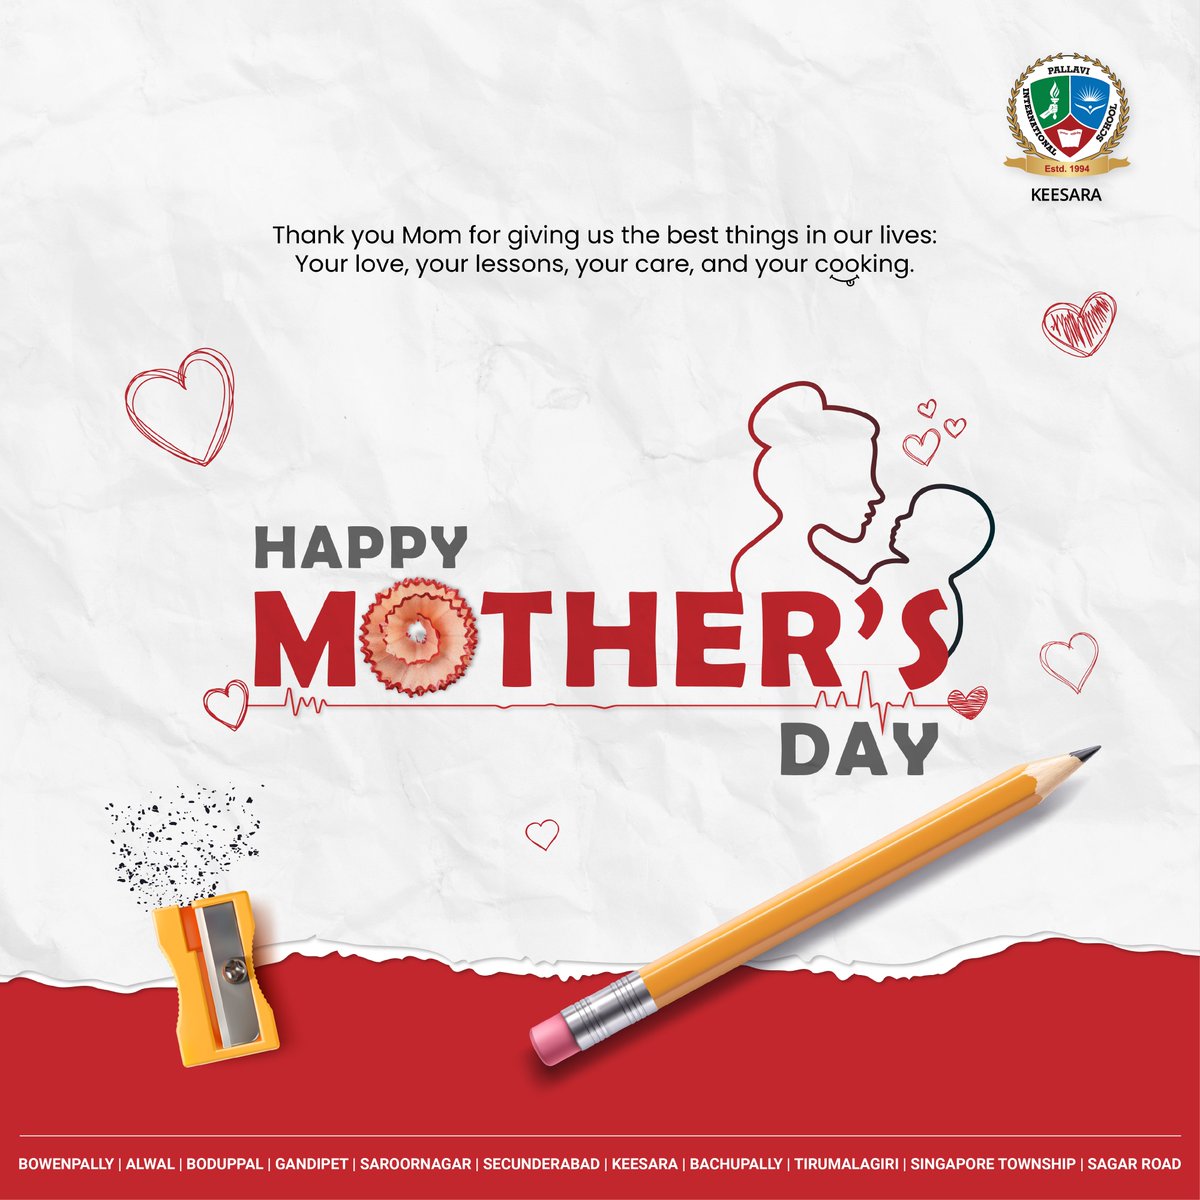 🌟 Today, we celebrate the guiding lights of our lives, the nurturers of our dreams. Happy Mother's Day to all the incredible moms who shape our lives with love, wisdom, and endless support. 💐 

#happymothersday #momlove #pgos #pis #piskeesara #keesara